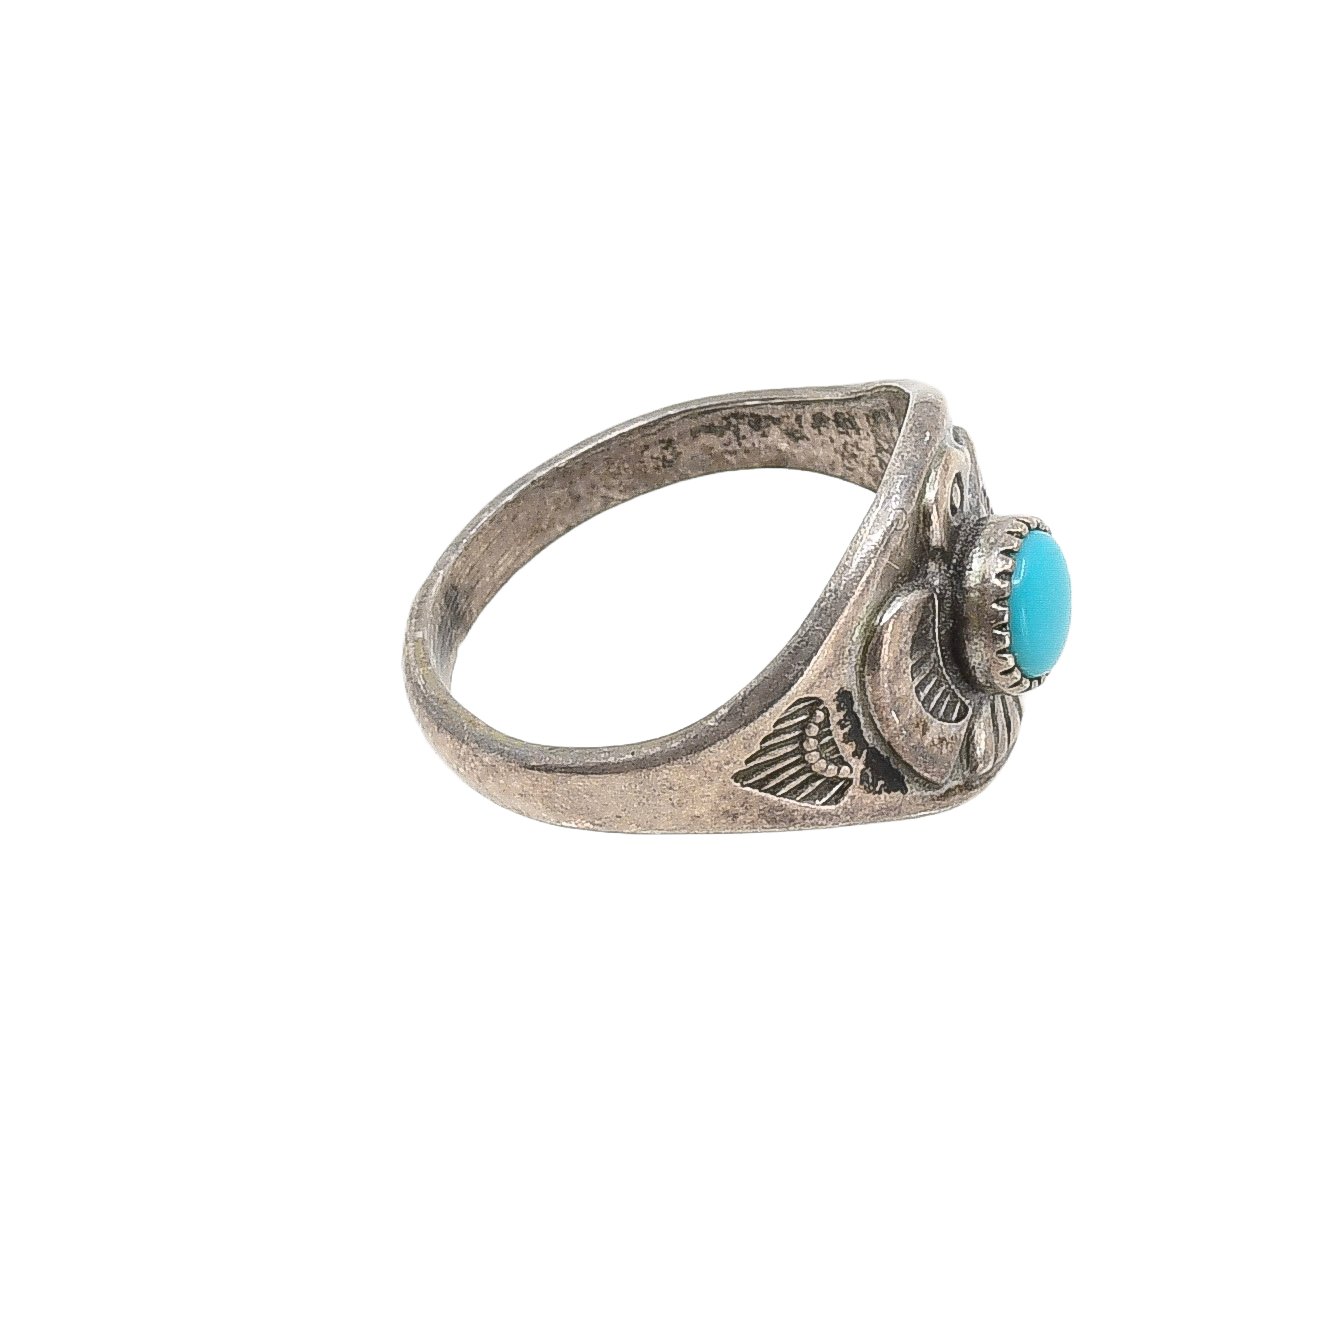 Vintage Silver Thunderbird Turquoise Ring Bell Trading Post - Turquoise & Tufa